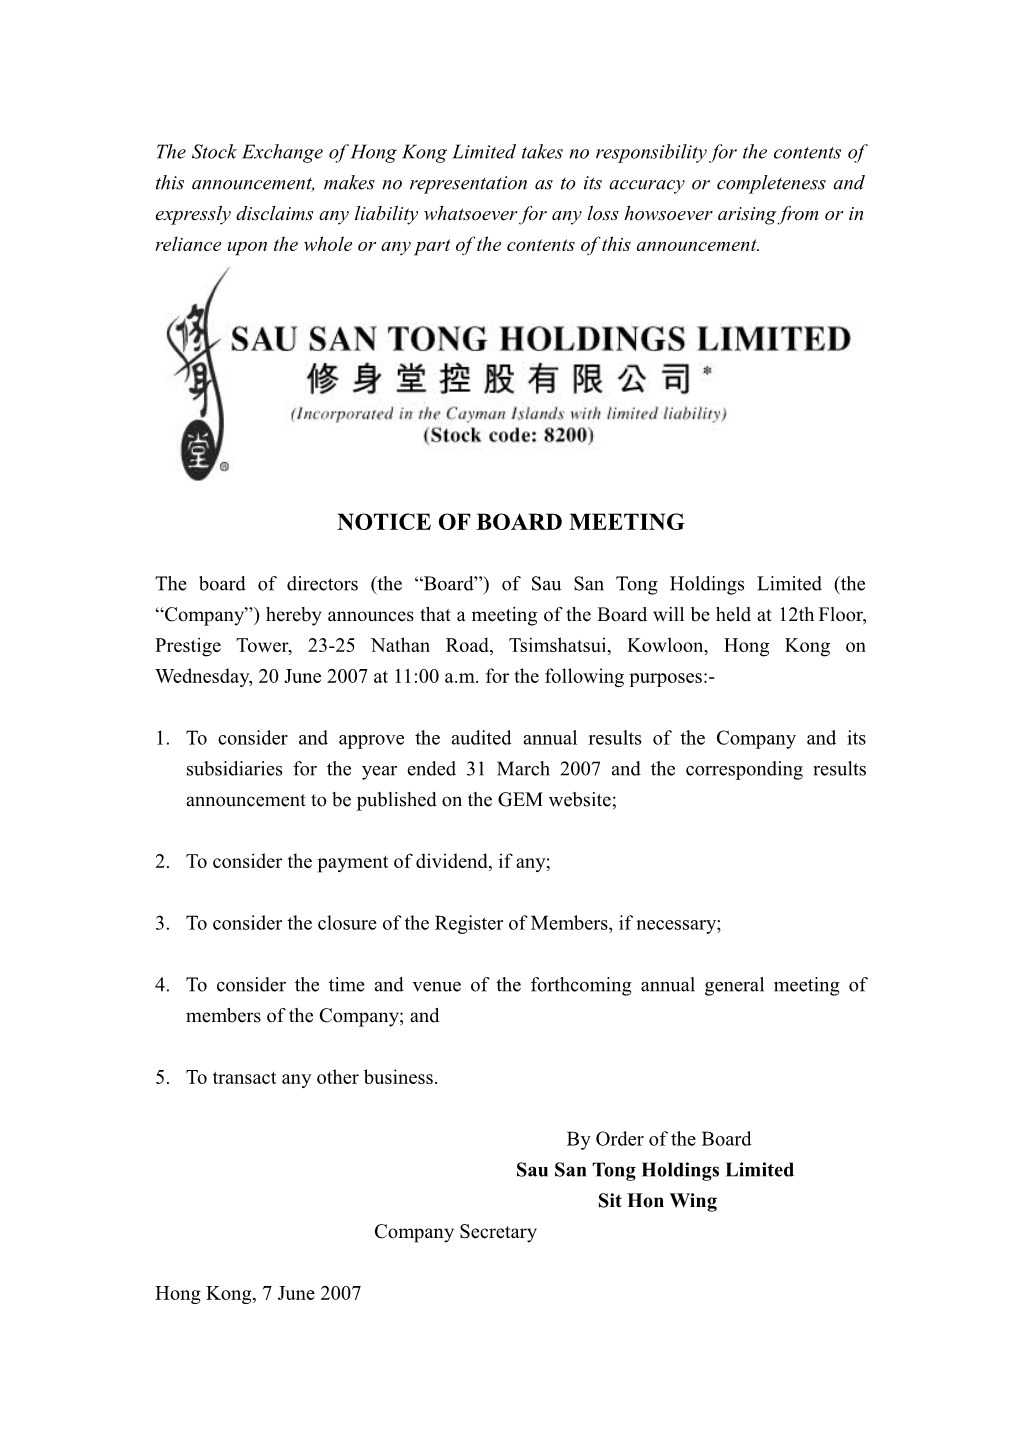 The Stock Exchange of Hong Kong Limited Takes No Responsibility for the Contents of This s1